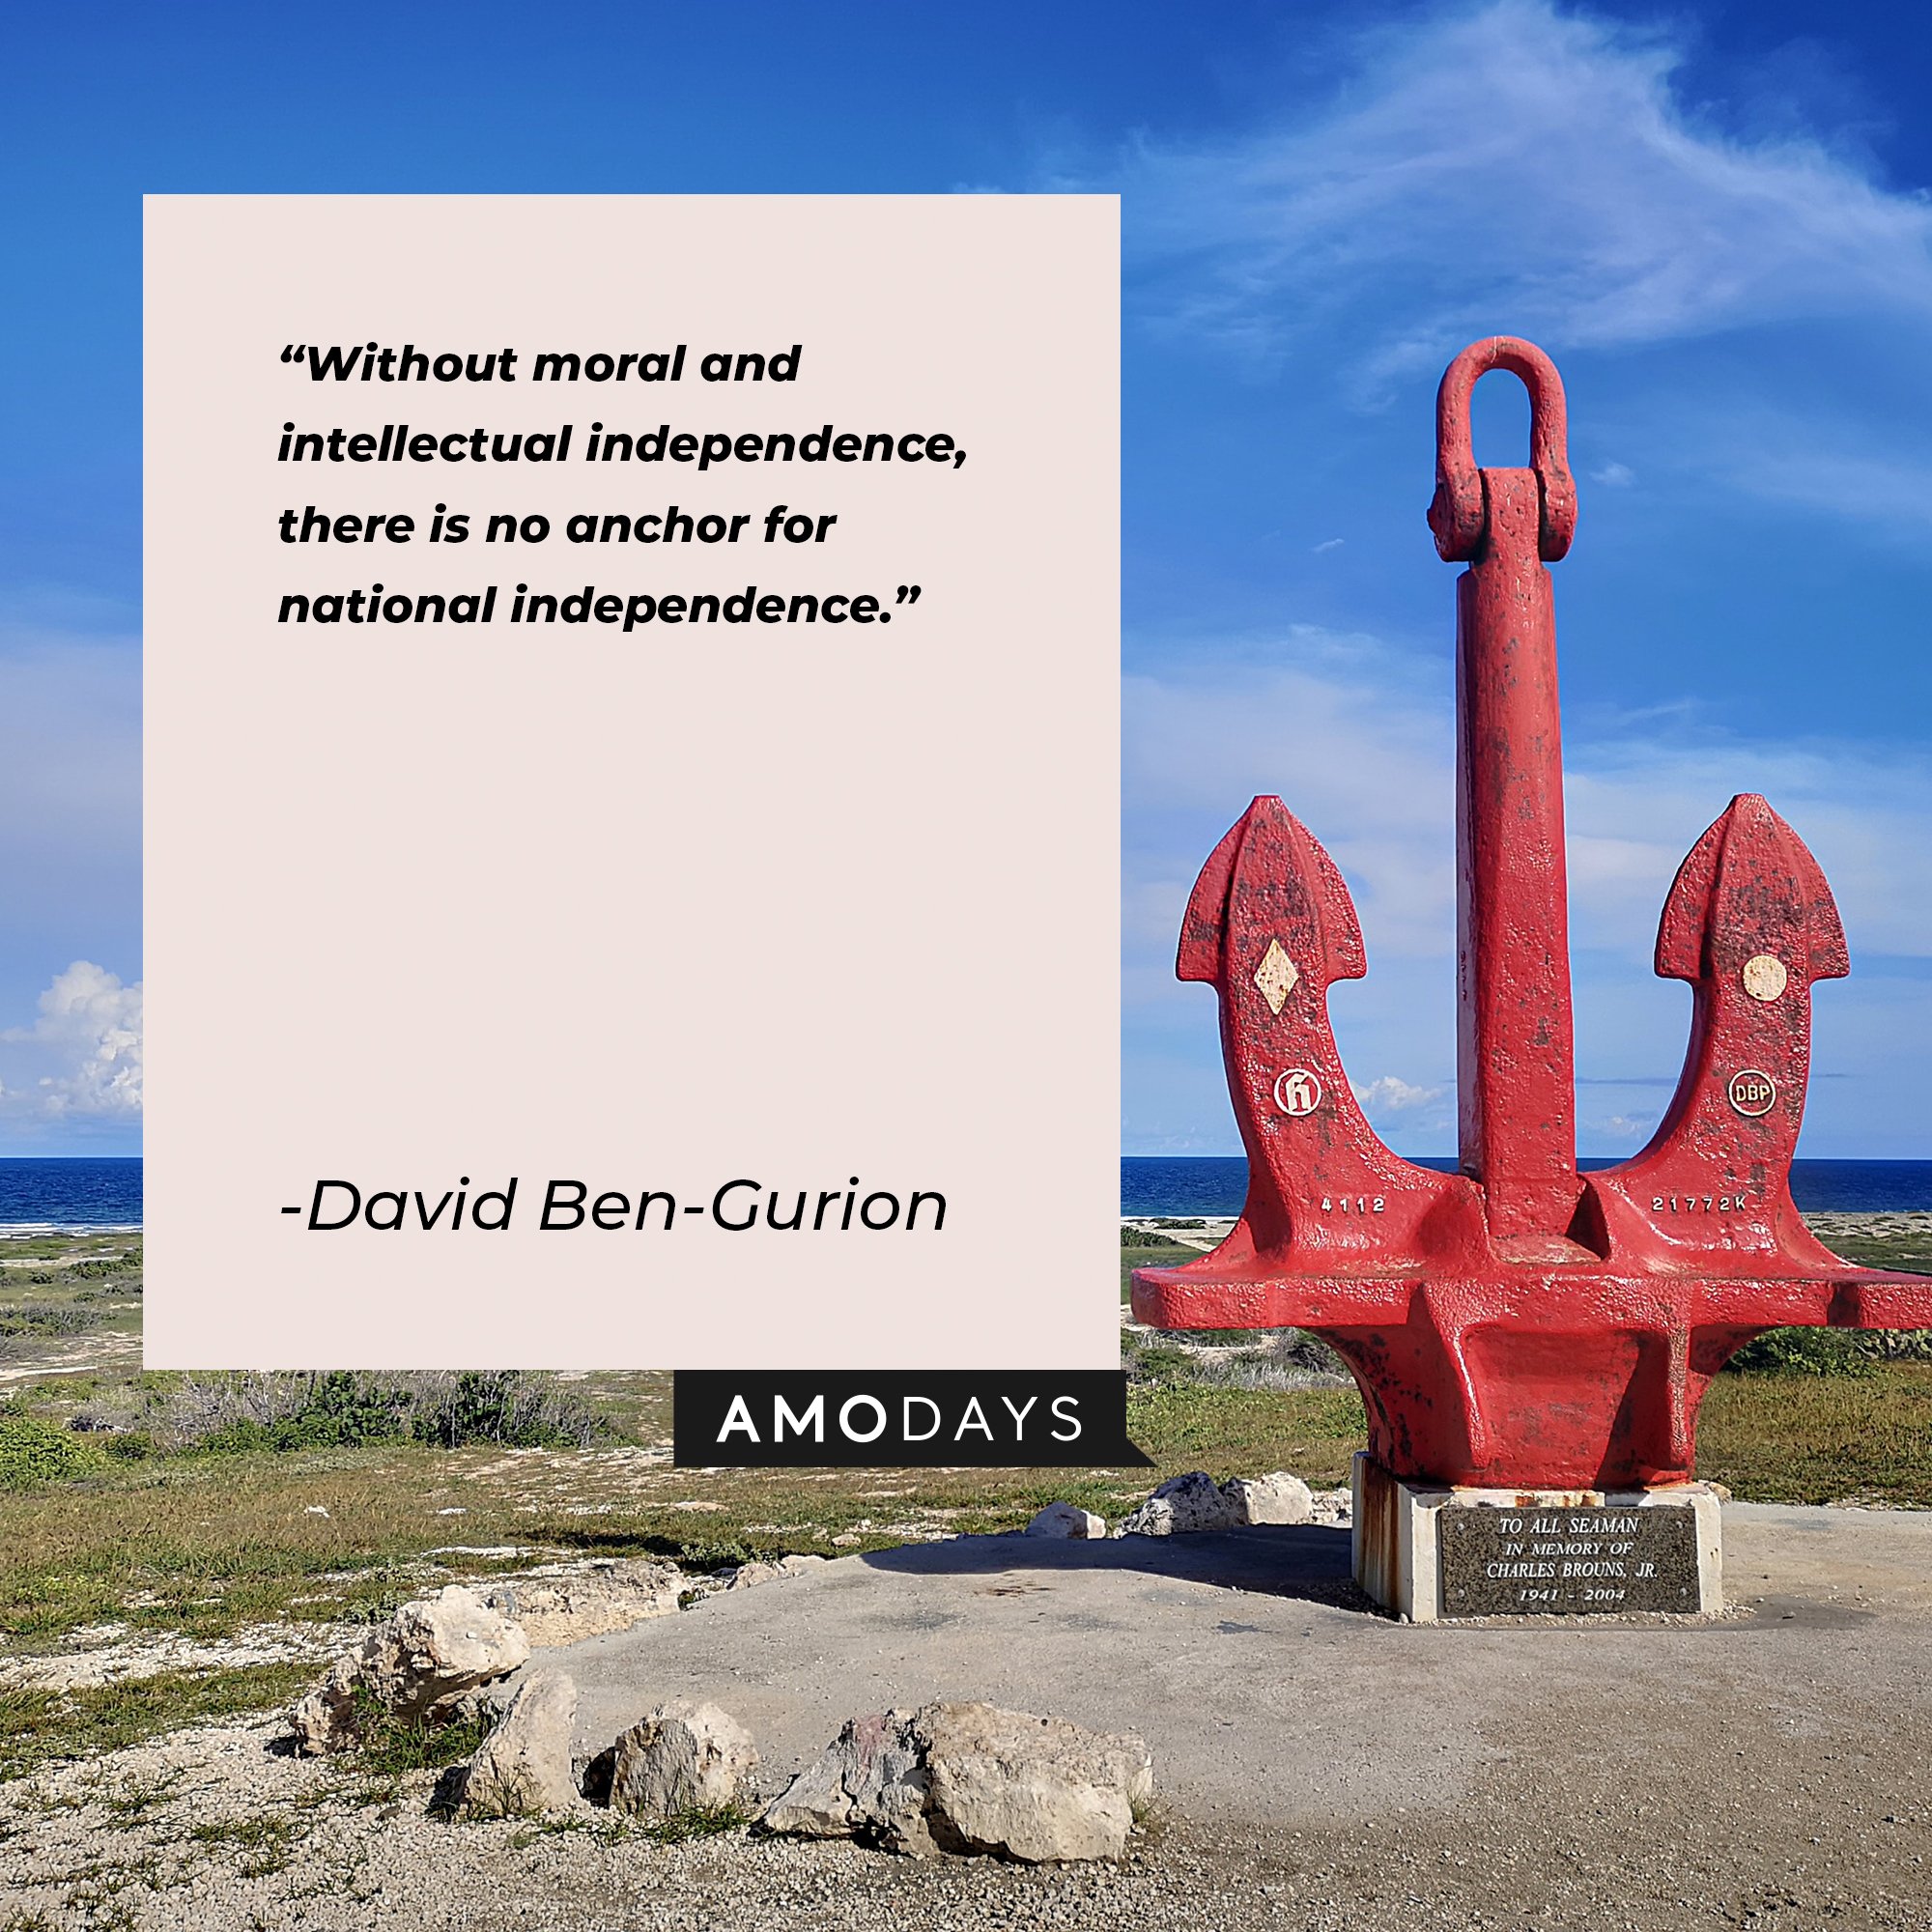 David Ben-Gurion's quote: "Without moral and intellectual independence, there is no anchor for national independence." | Image: AmoDays